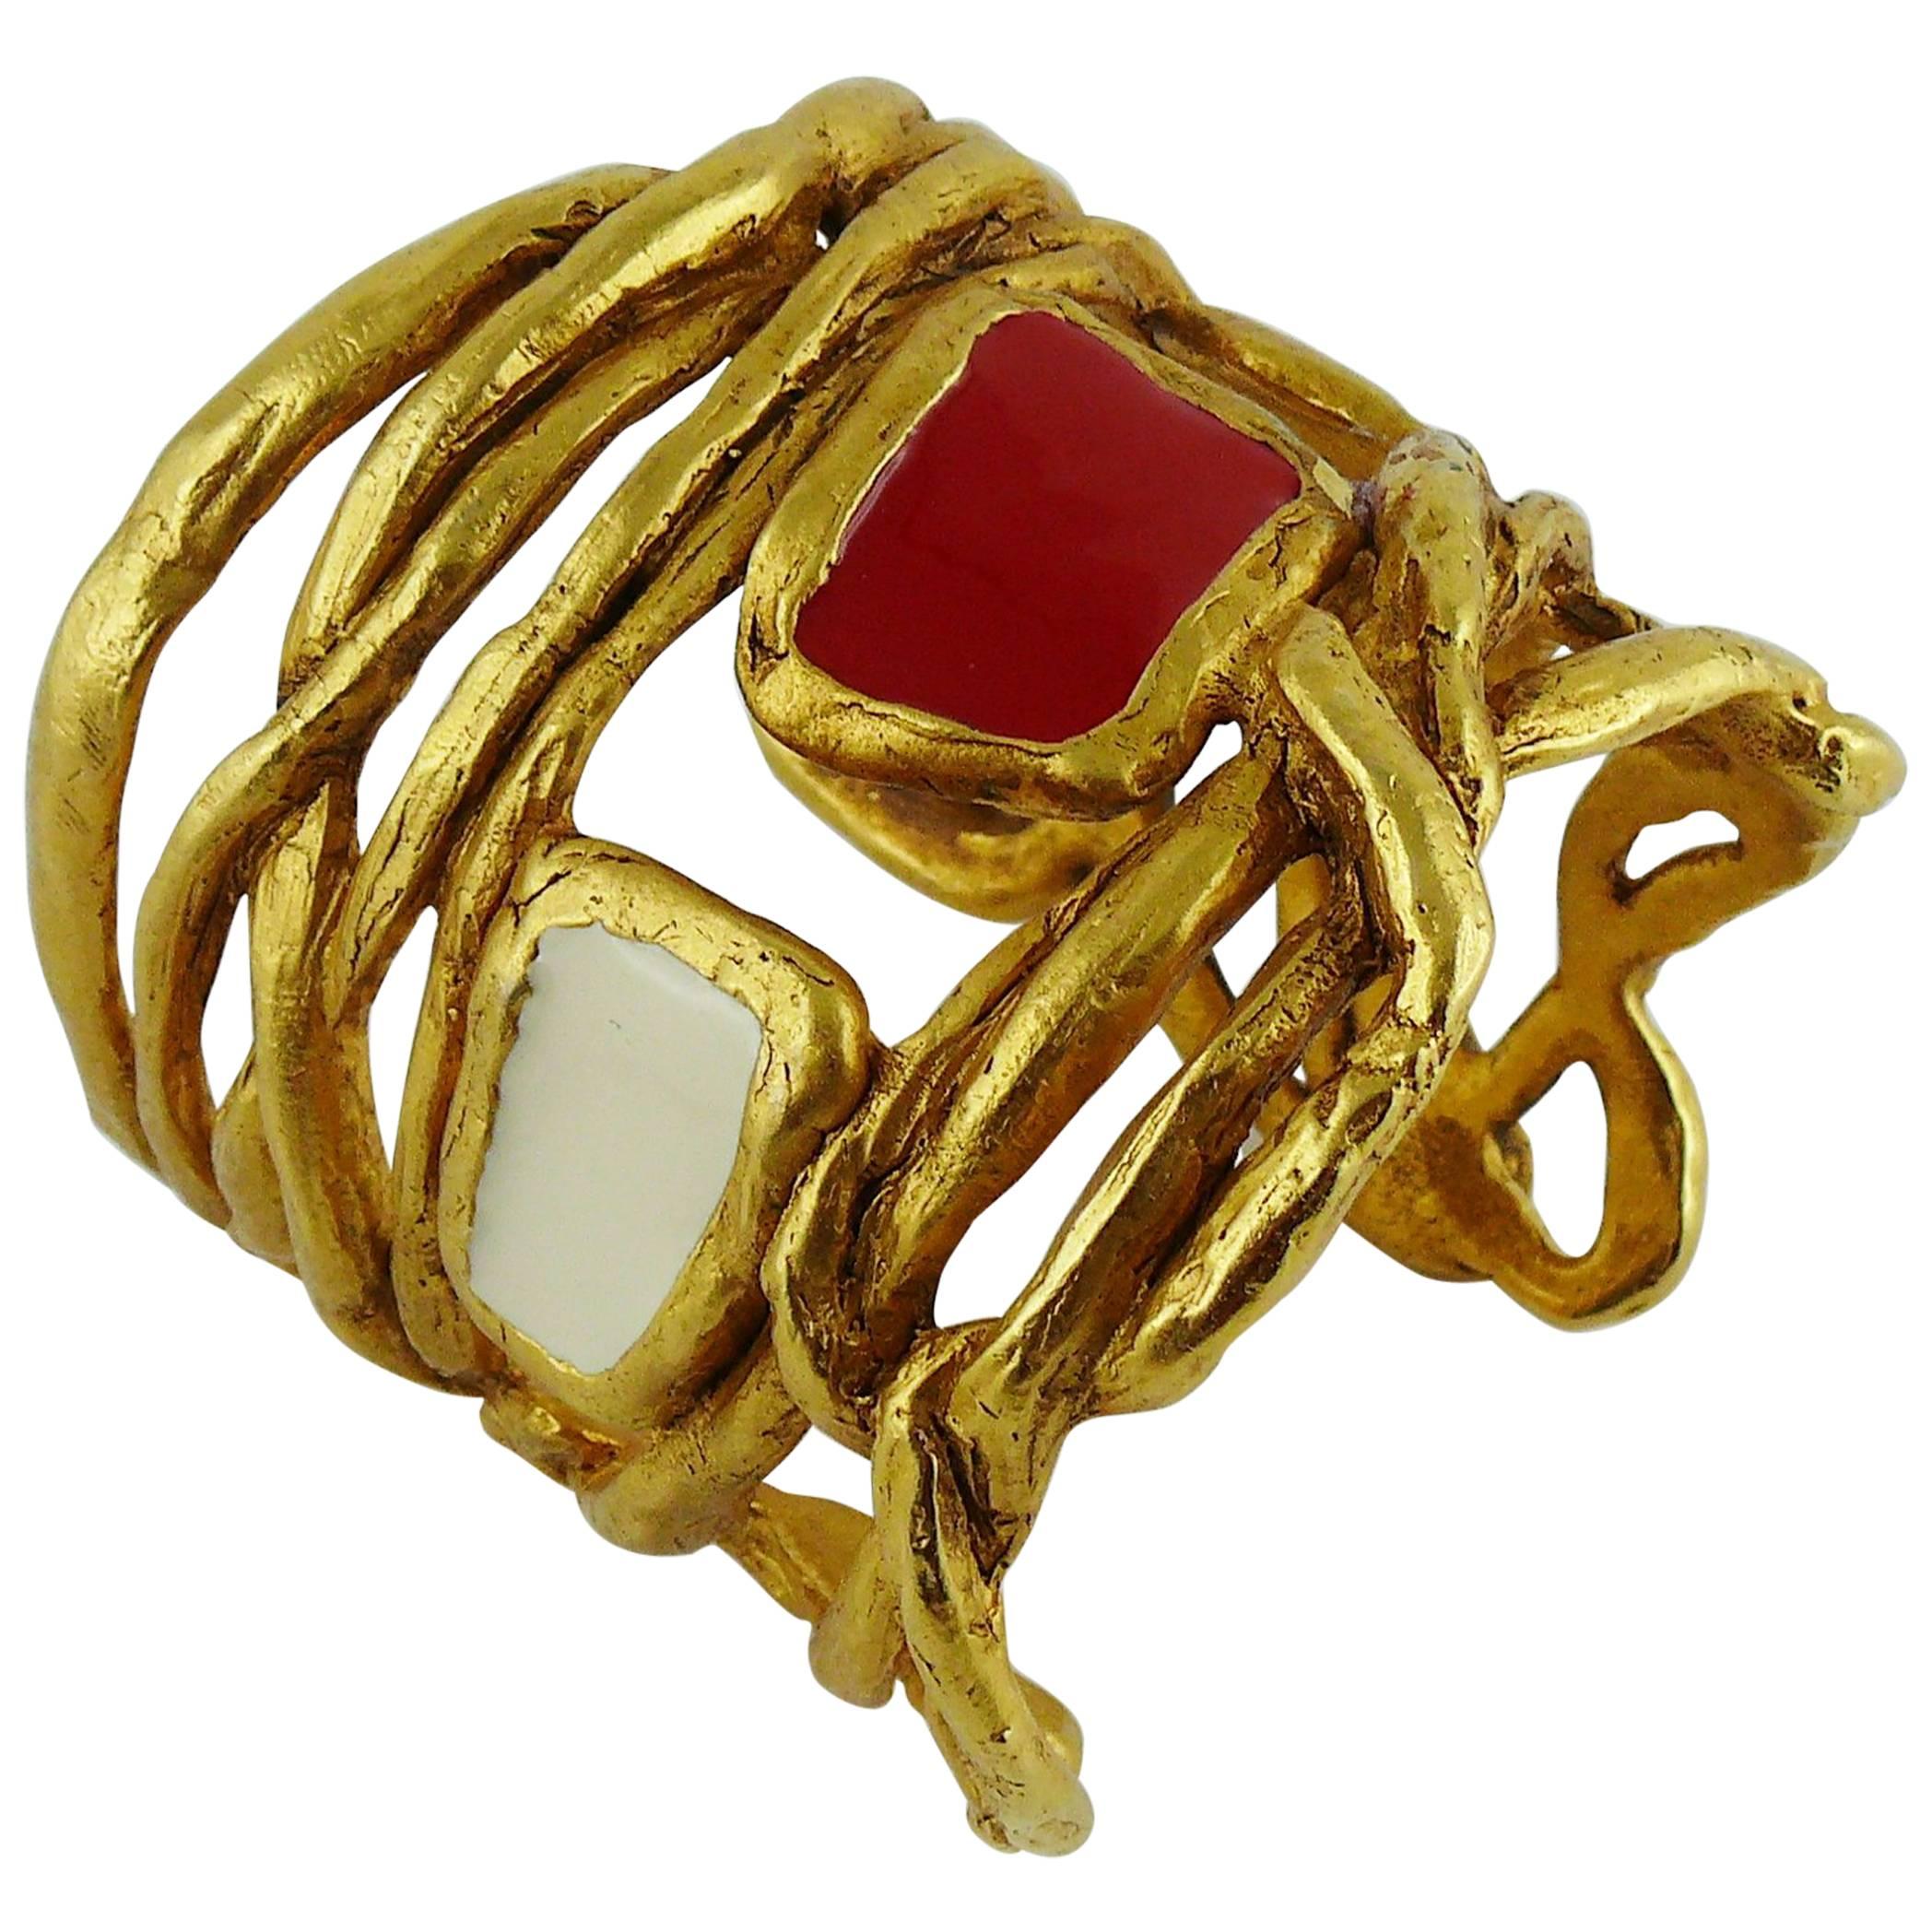 Christian Lacroix Vintage Gold Tone Wired Cuff Bracelet with Red White Enamel